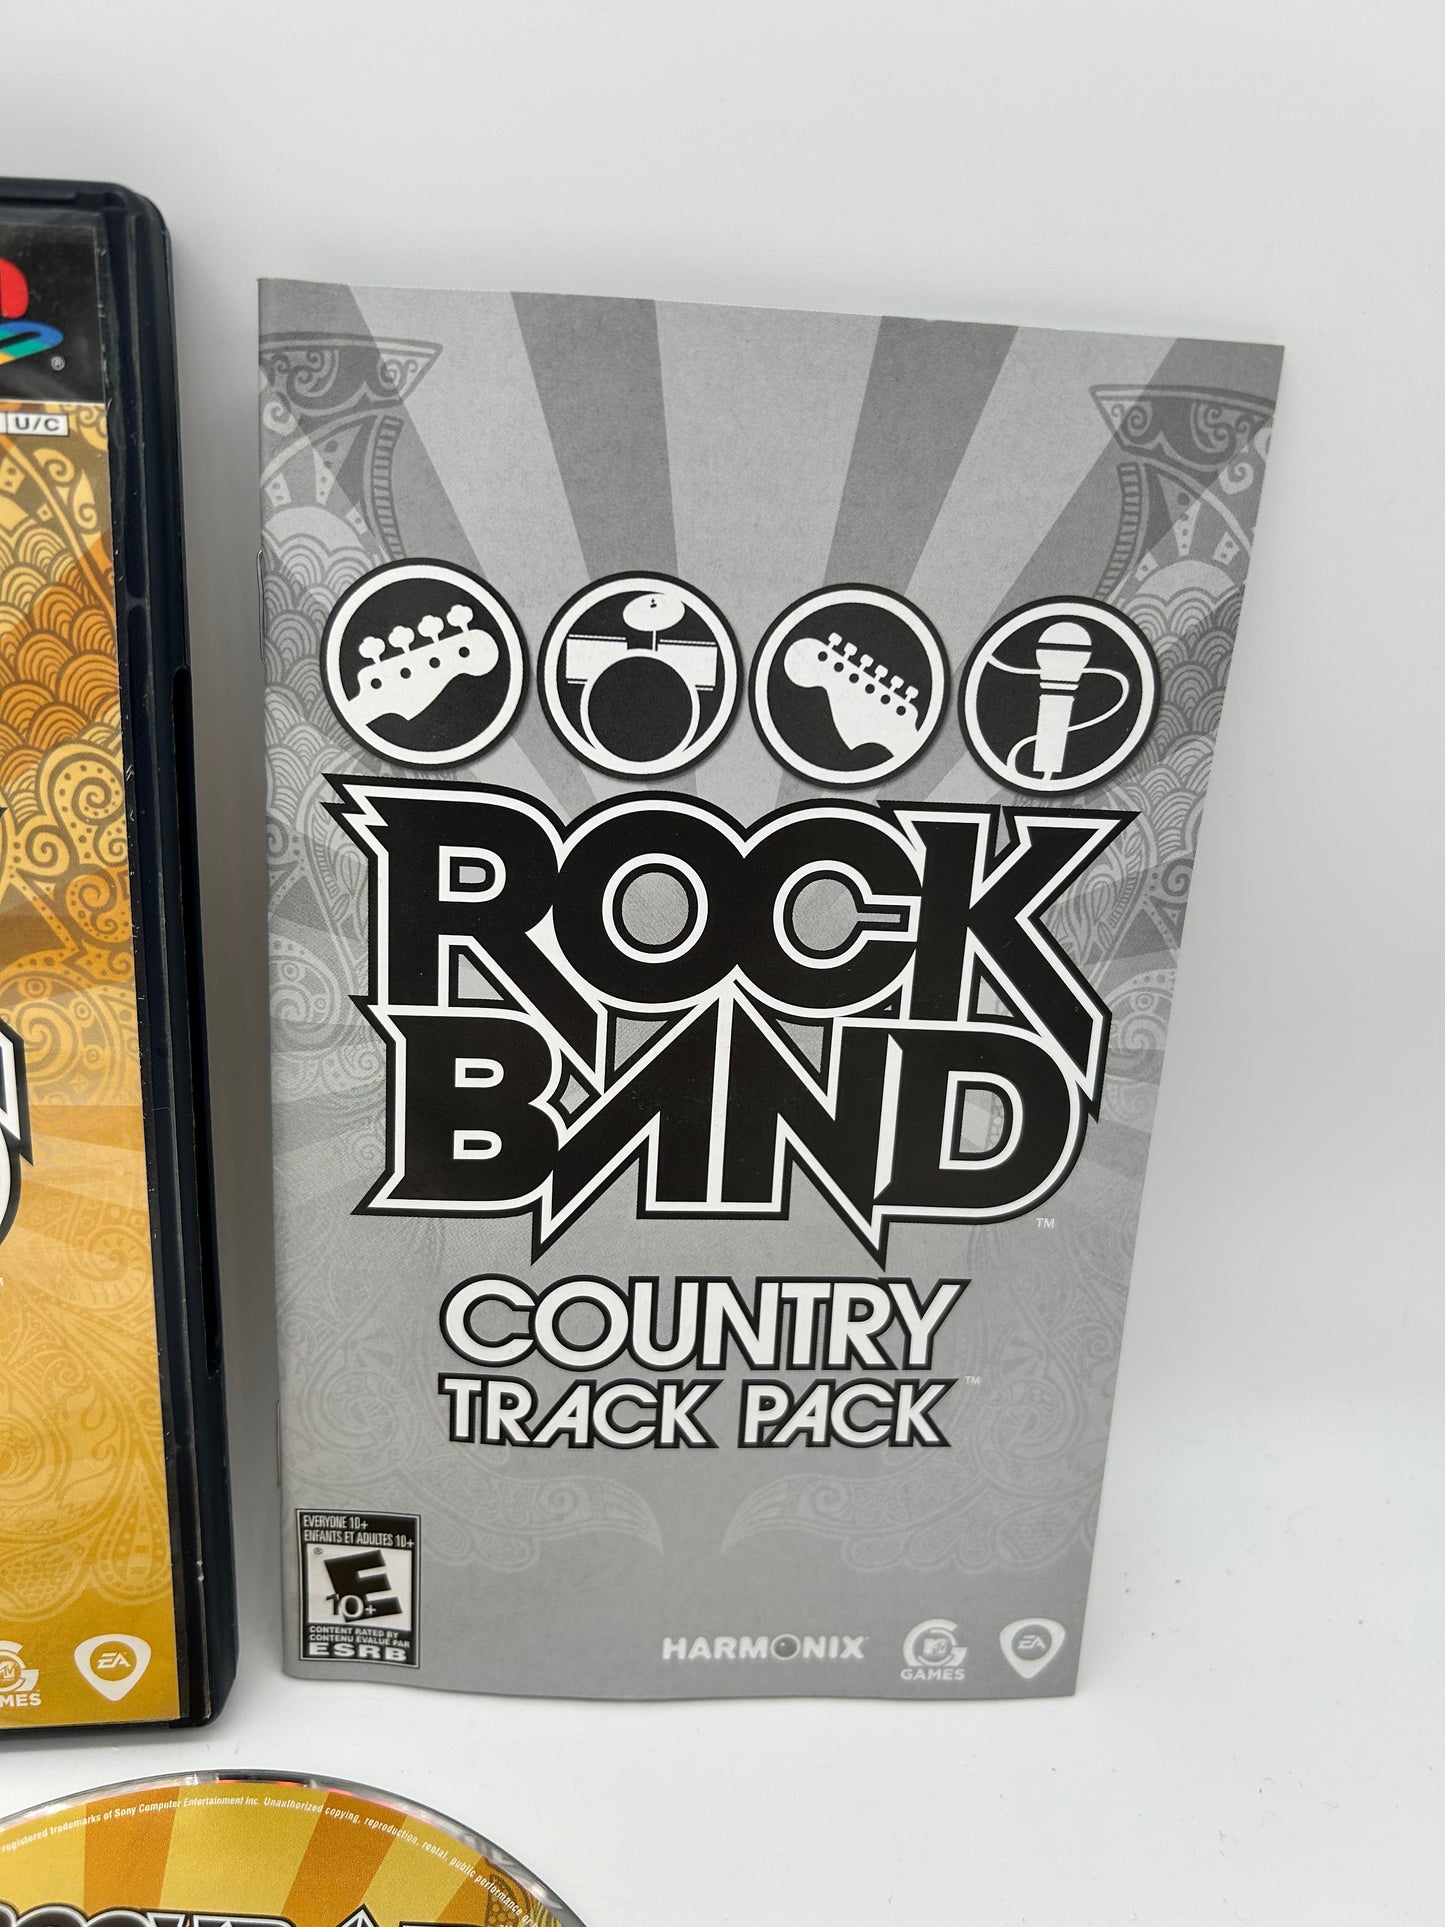 SONY PLAYSTATiON 2 [PS2] | ROCK BAND COUNTRY TRACK PACK